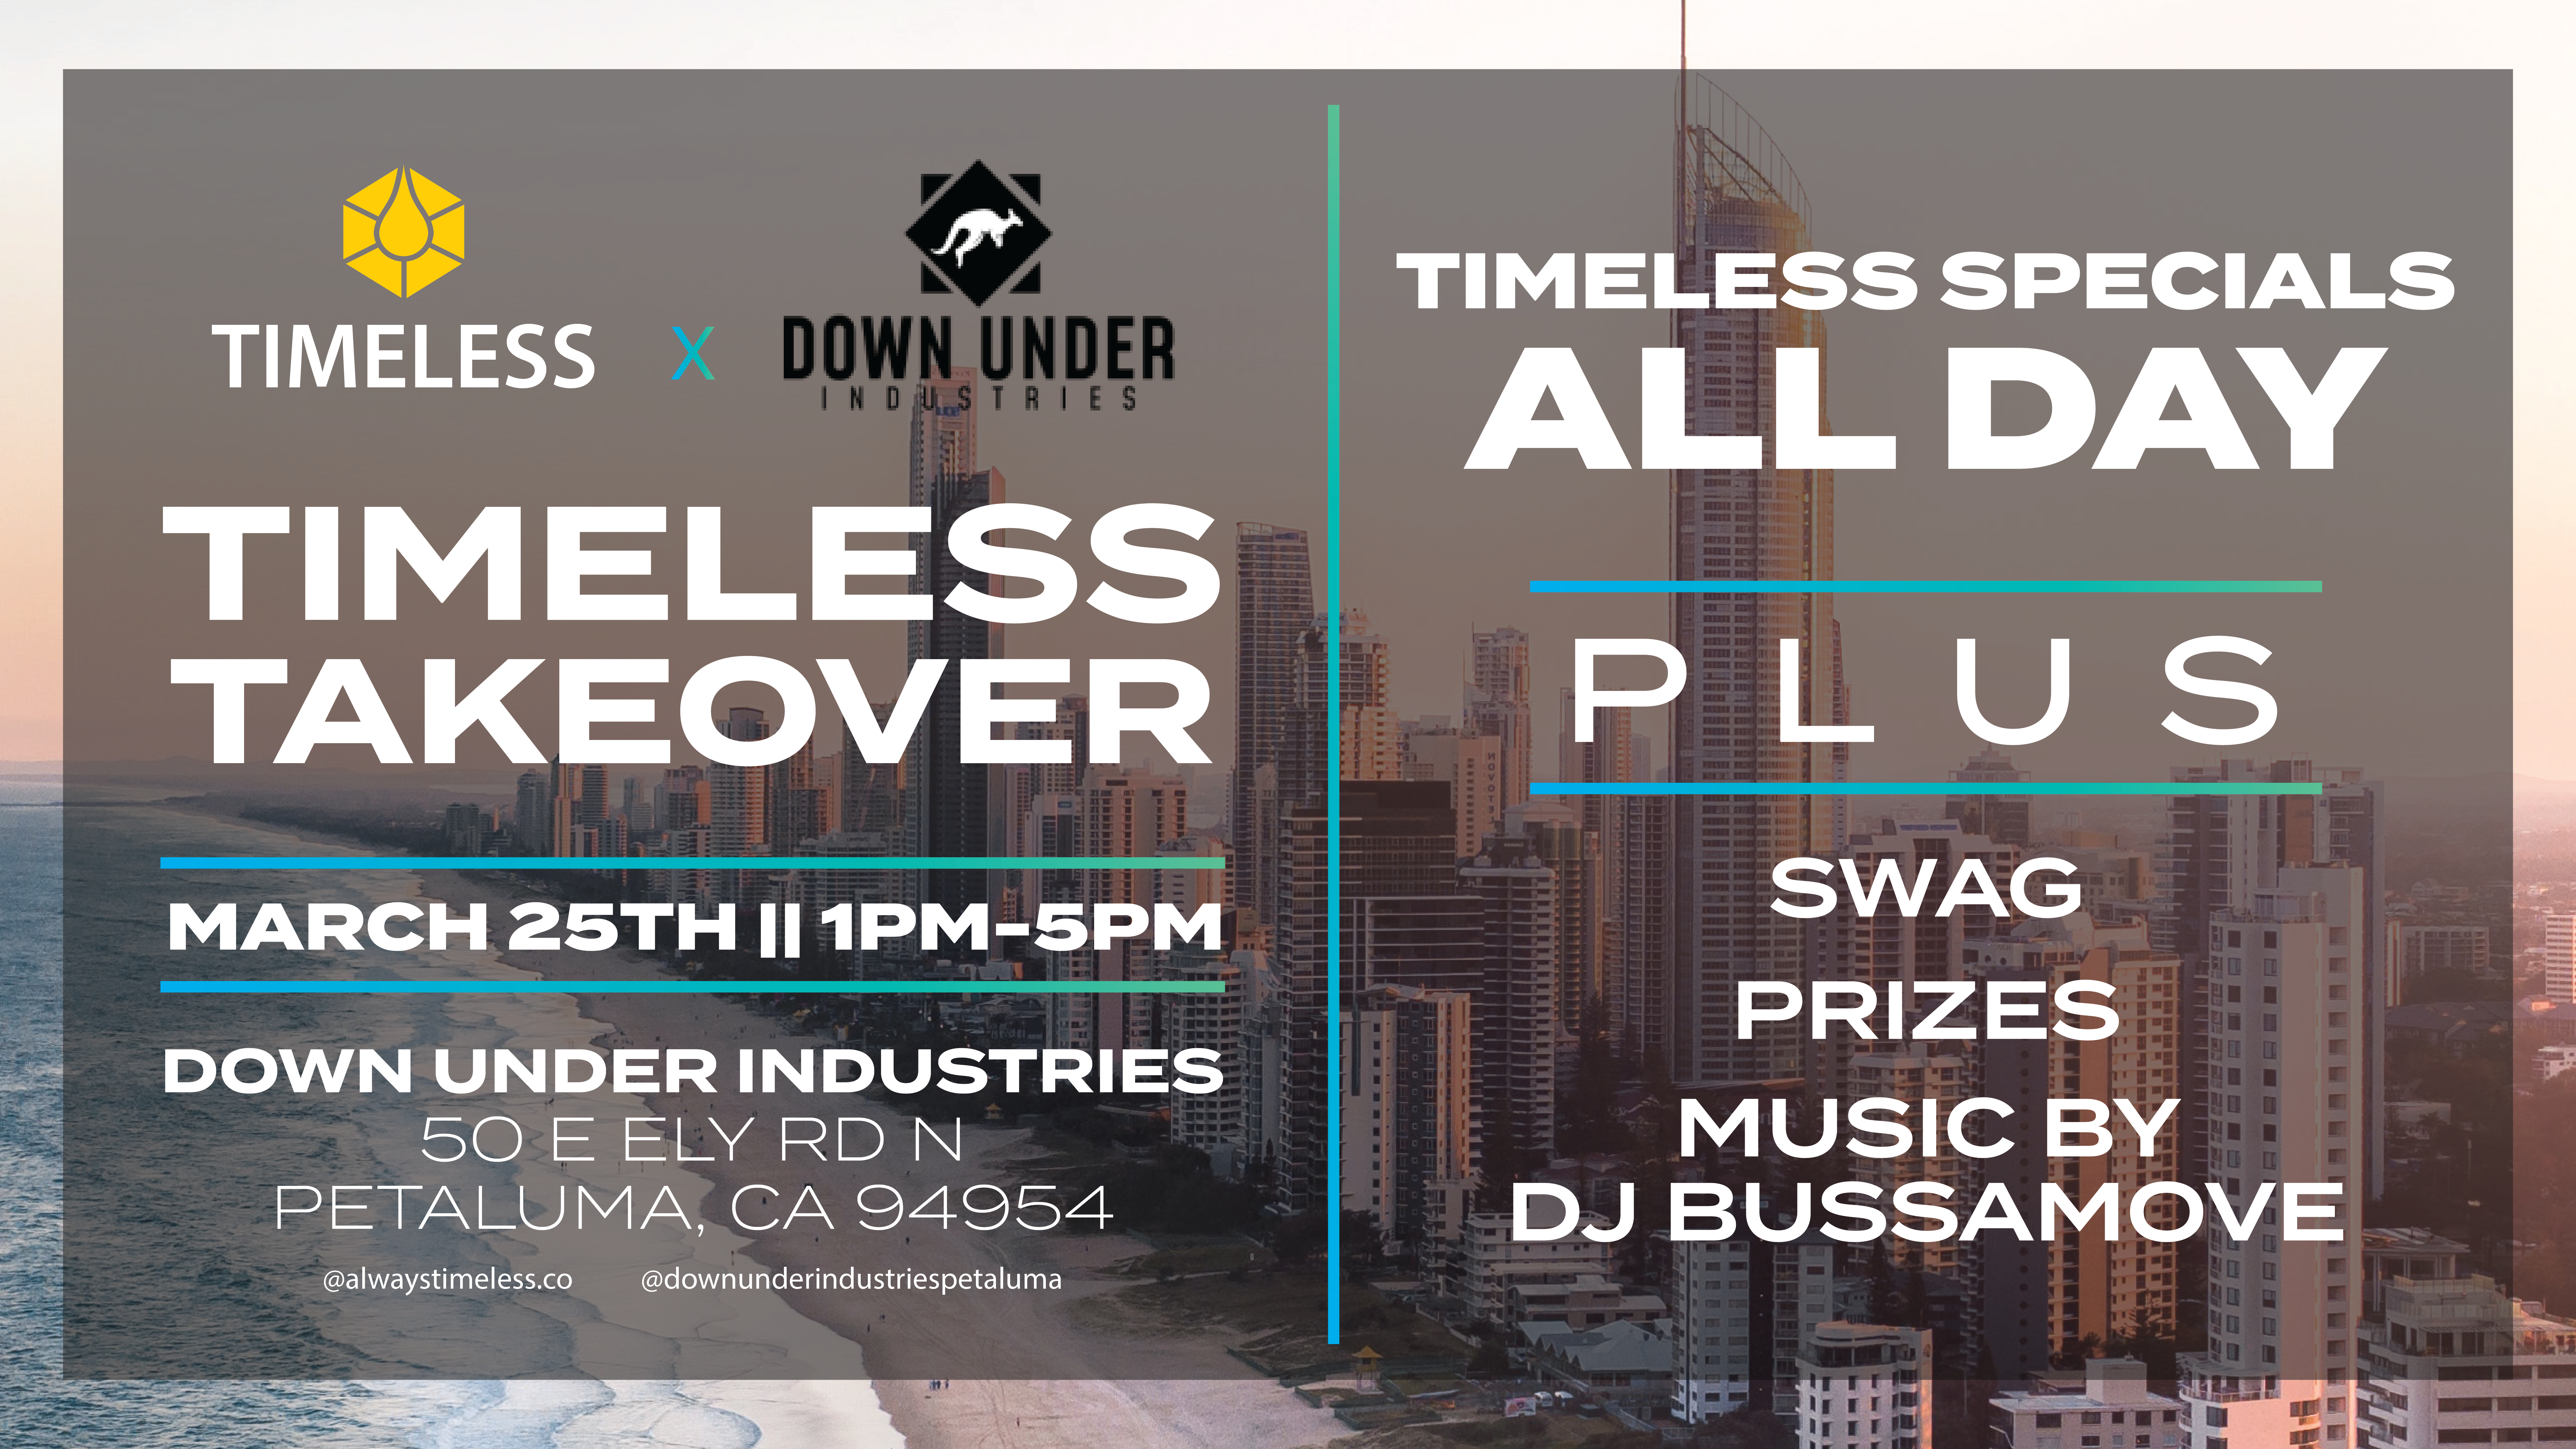 TIMELESS TAKEOVER DAY